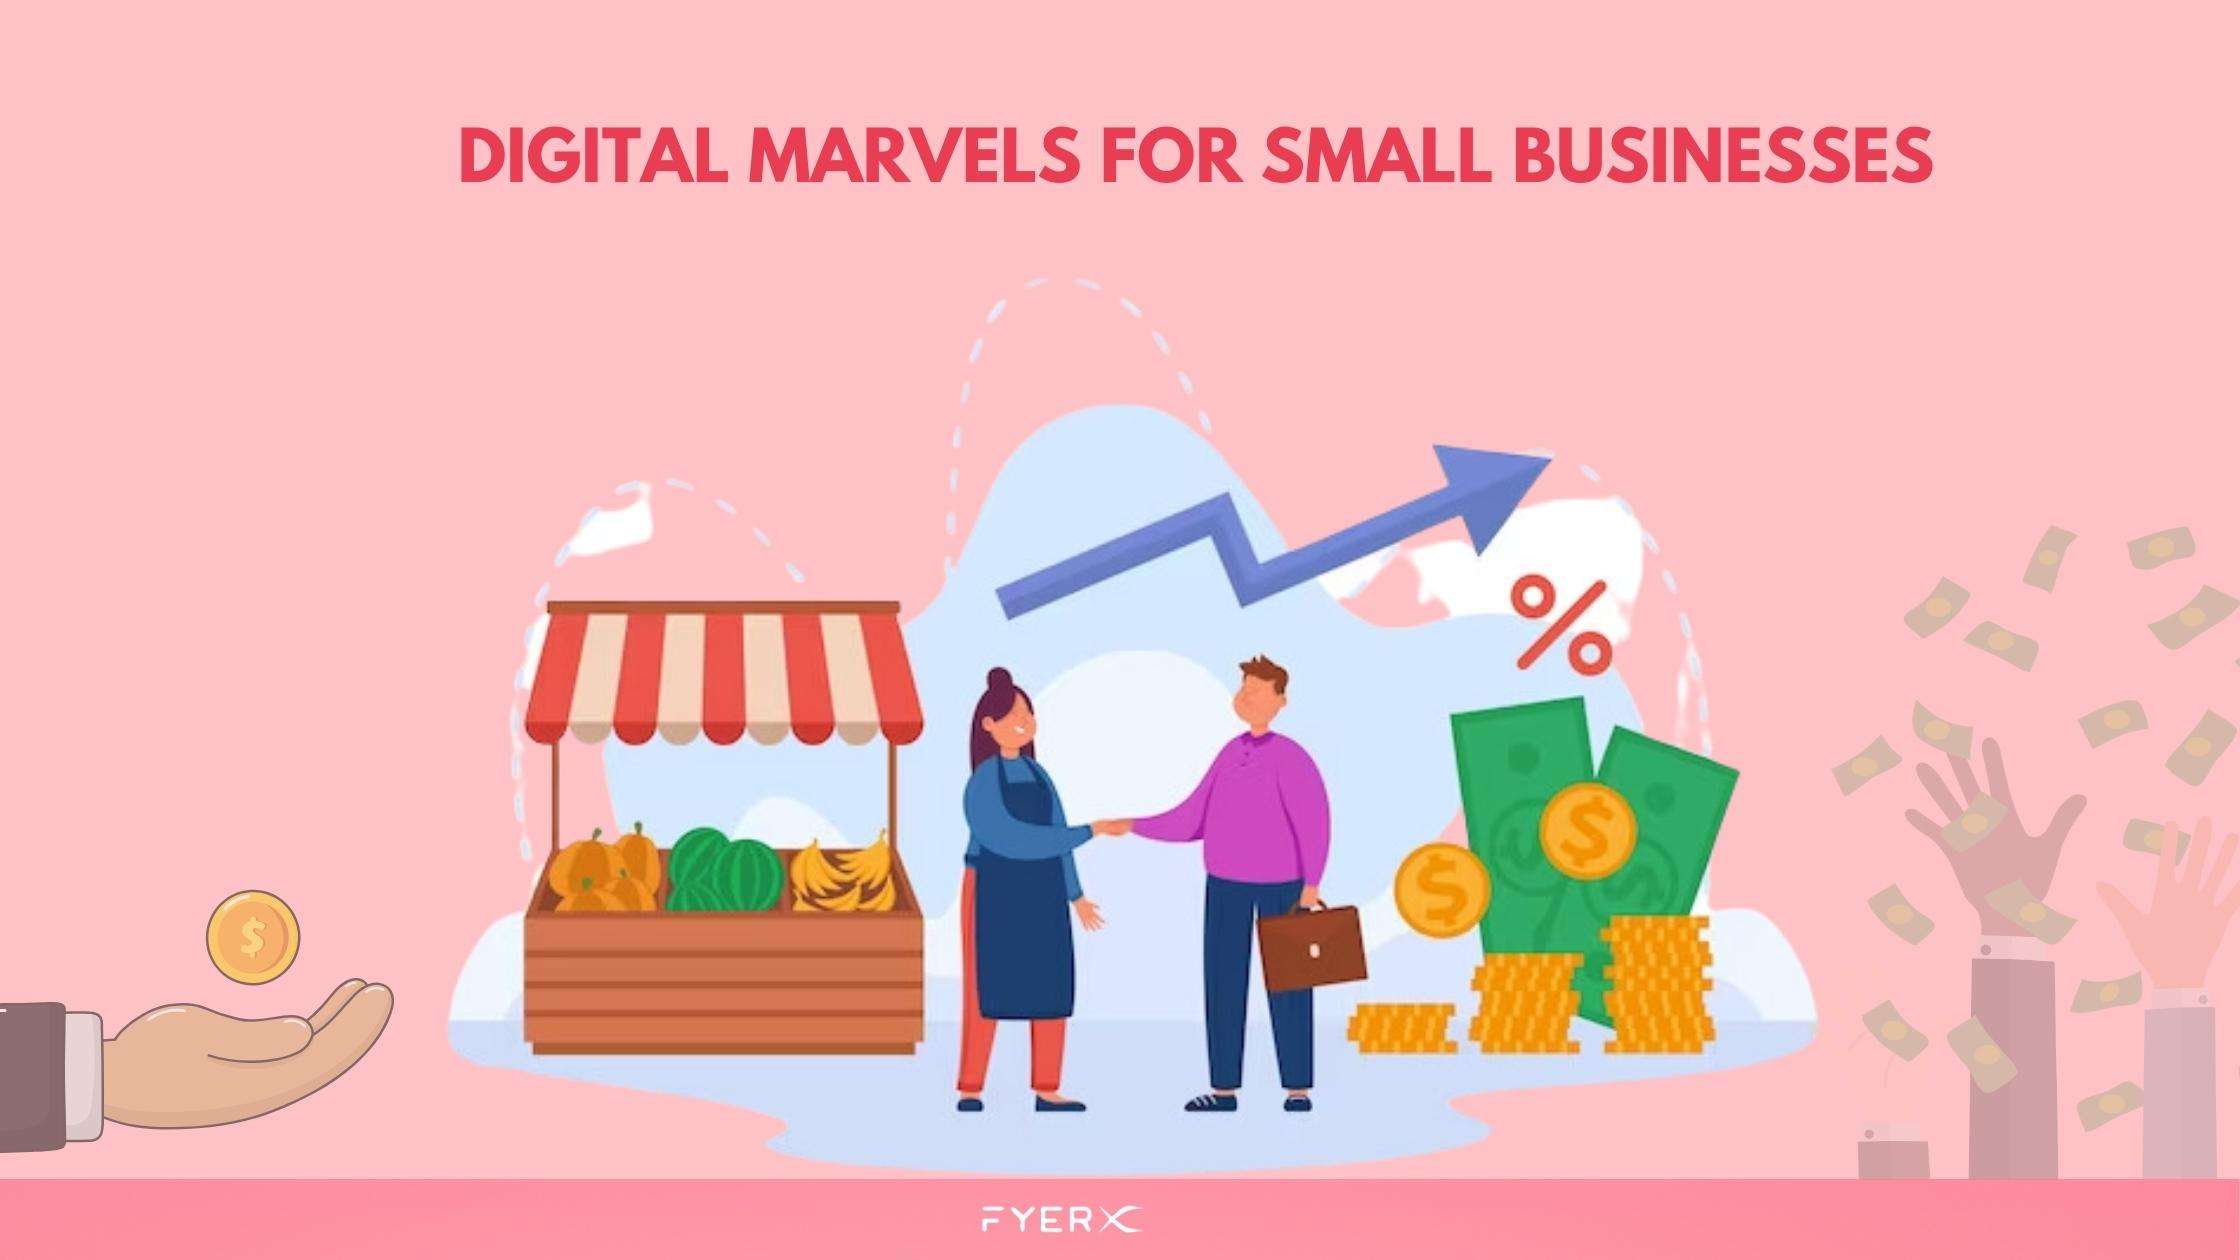 8 Secrets That Small Businesses Need to Know About Digital Marketing